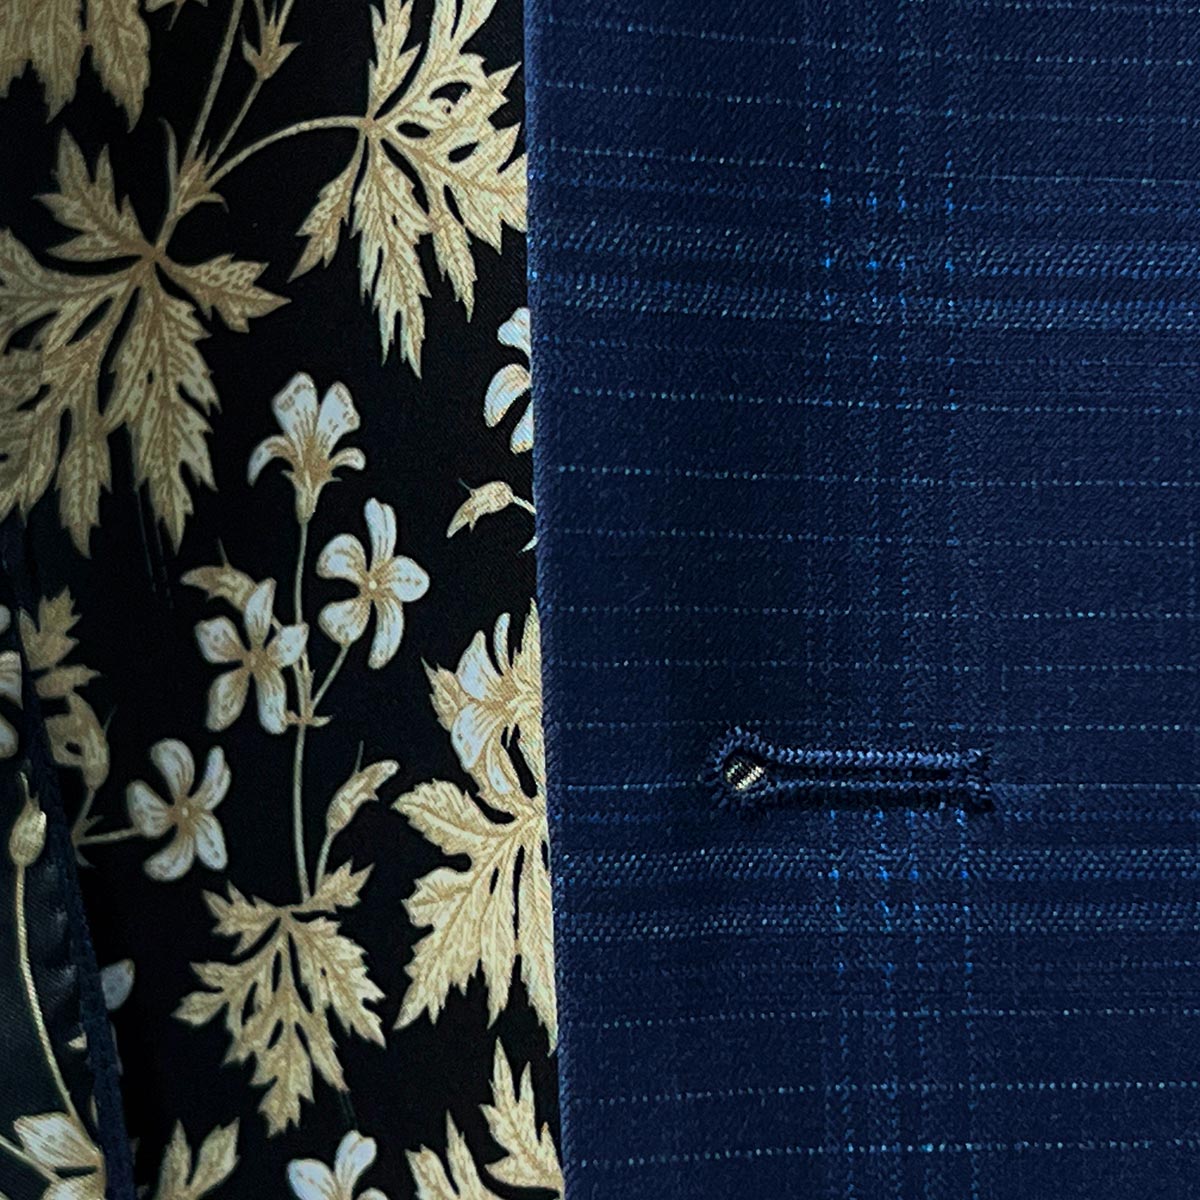 buttonholes adding a distinctive flair to a midnight blue windowpane suit.